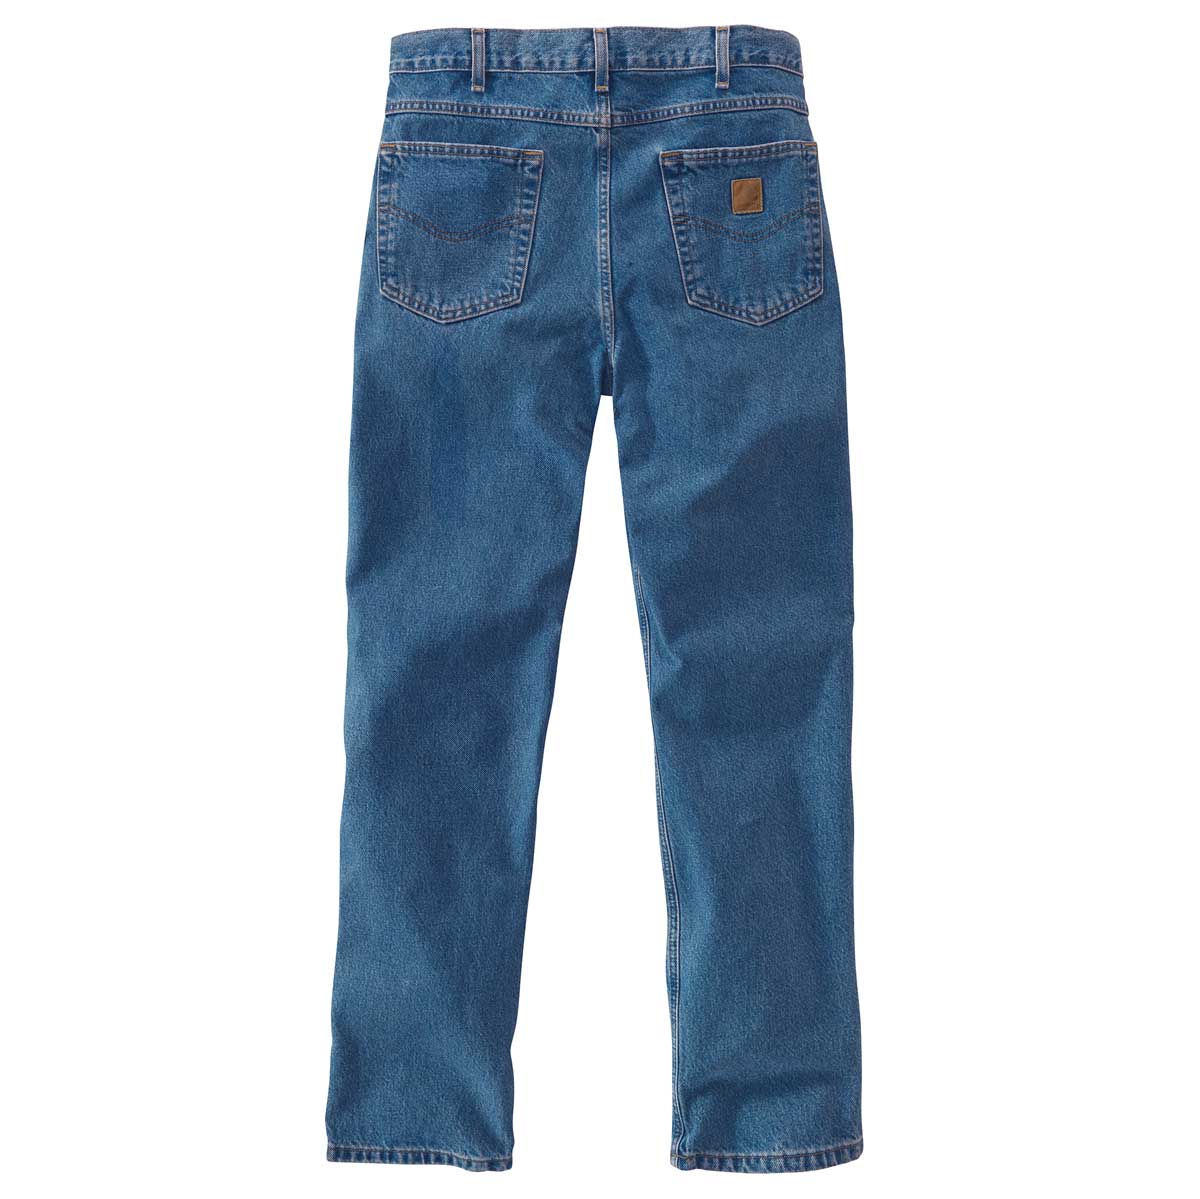 Carhartt B18 Traditional-Fit Darkstone Work Jeans | Gempler's